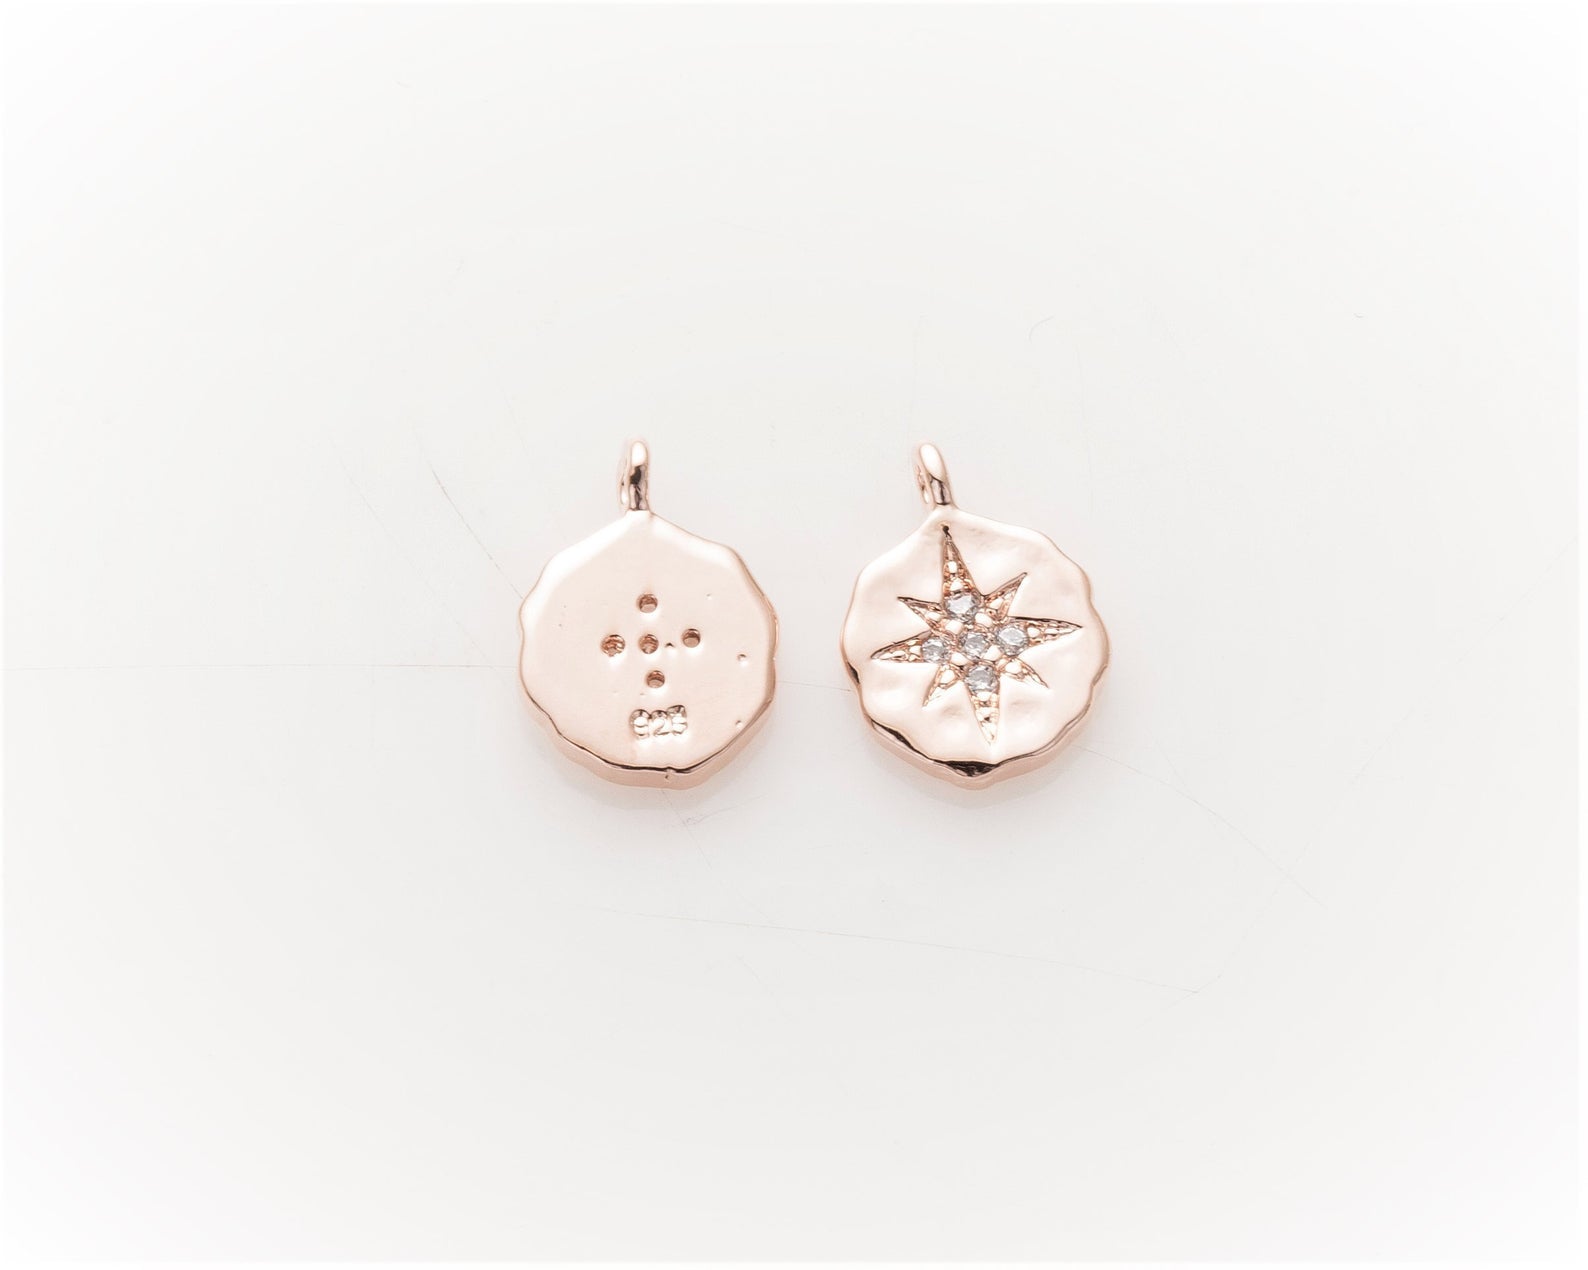 Rose gold north star charm - Rania Dabagh Jewelry